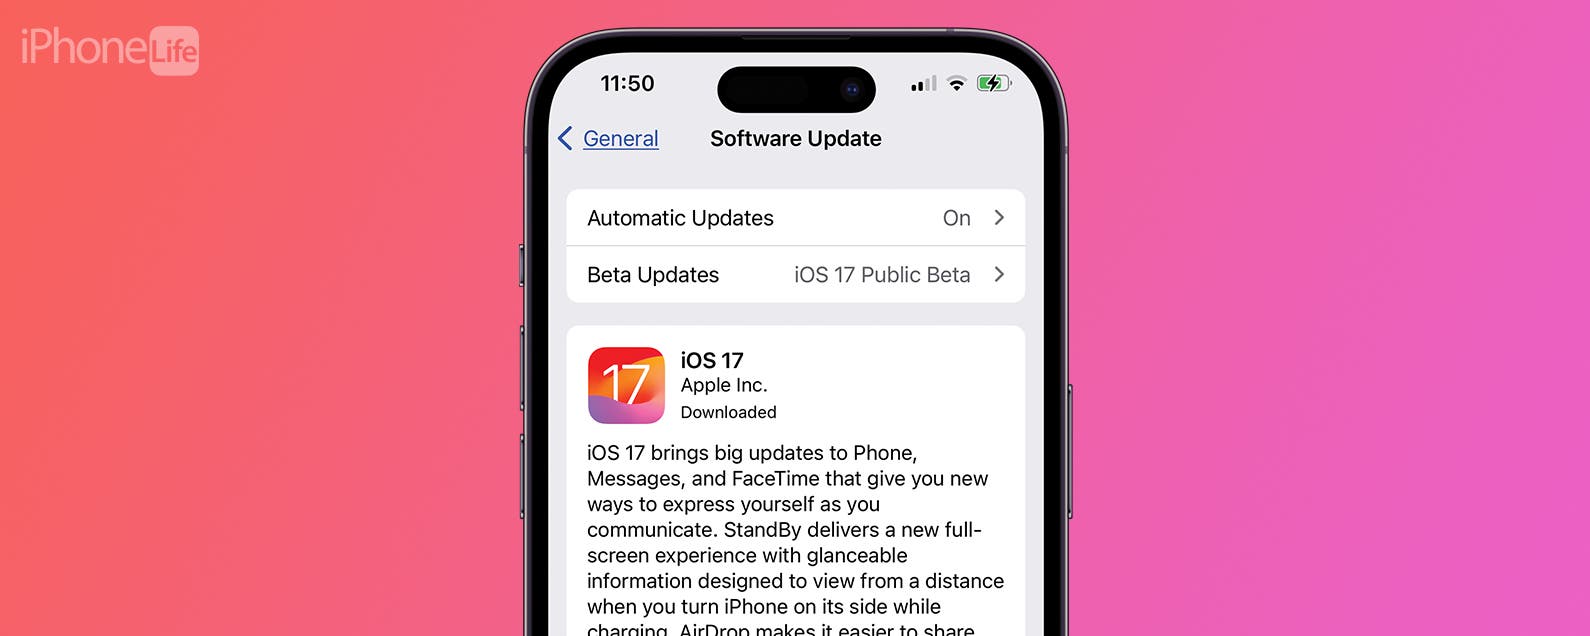 iOS 17 Release Date: When Does iOS 17 Come Out?